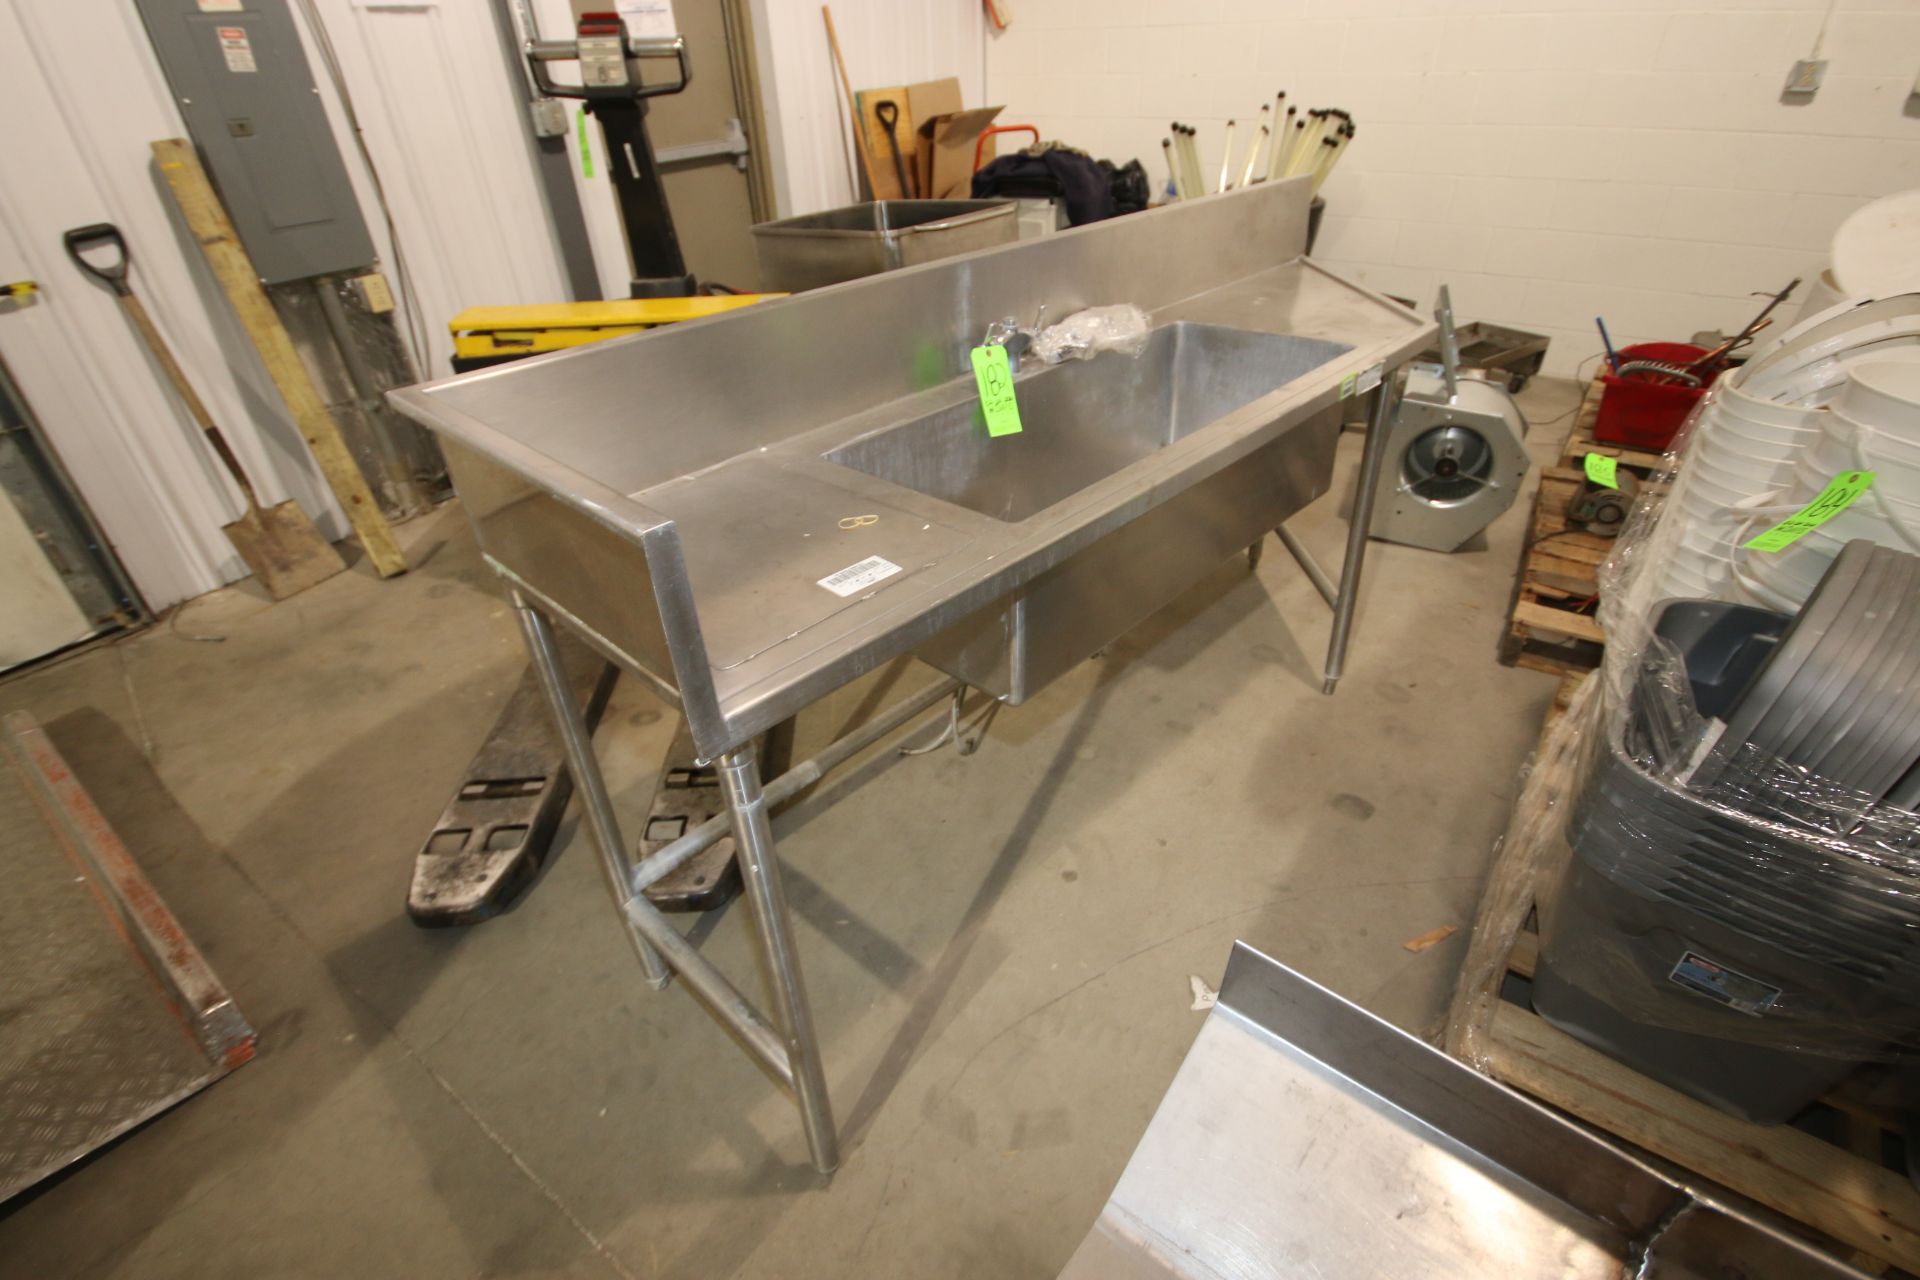 Single Bowl S/S Sink, Overall Dims.: Aprox. 96" L x 23" W x 36" H (LOCATED IN YOUNGSTOWN, OH) (